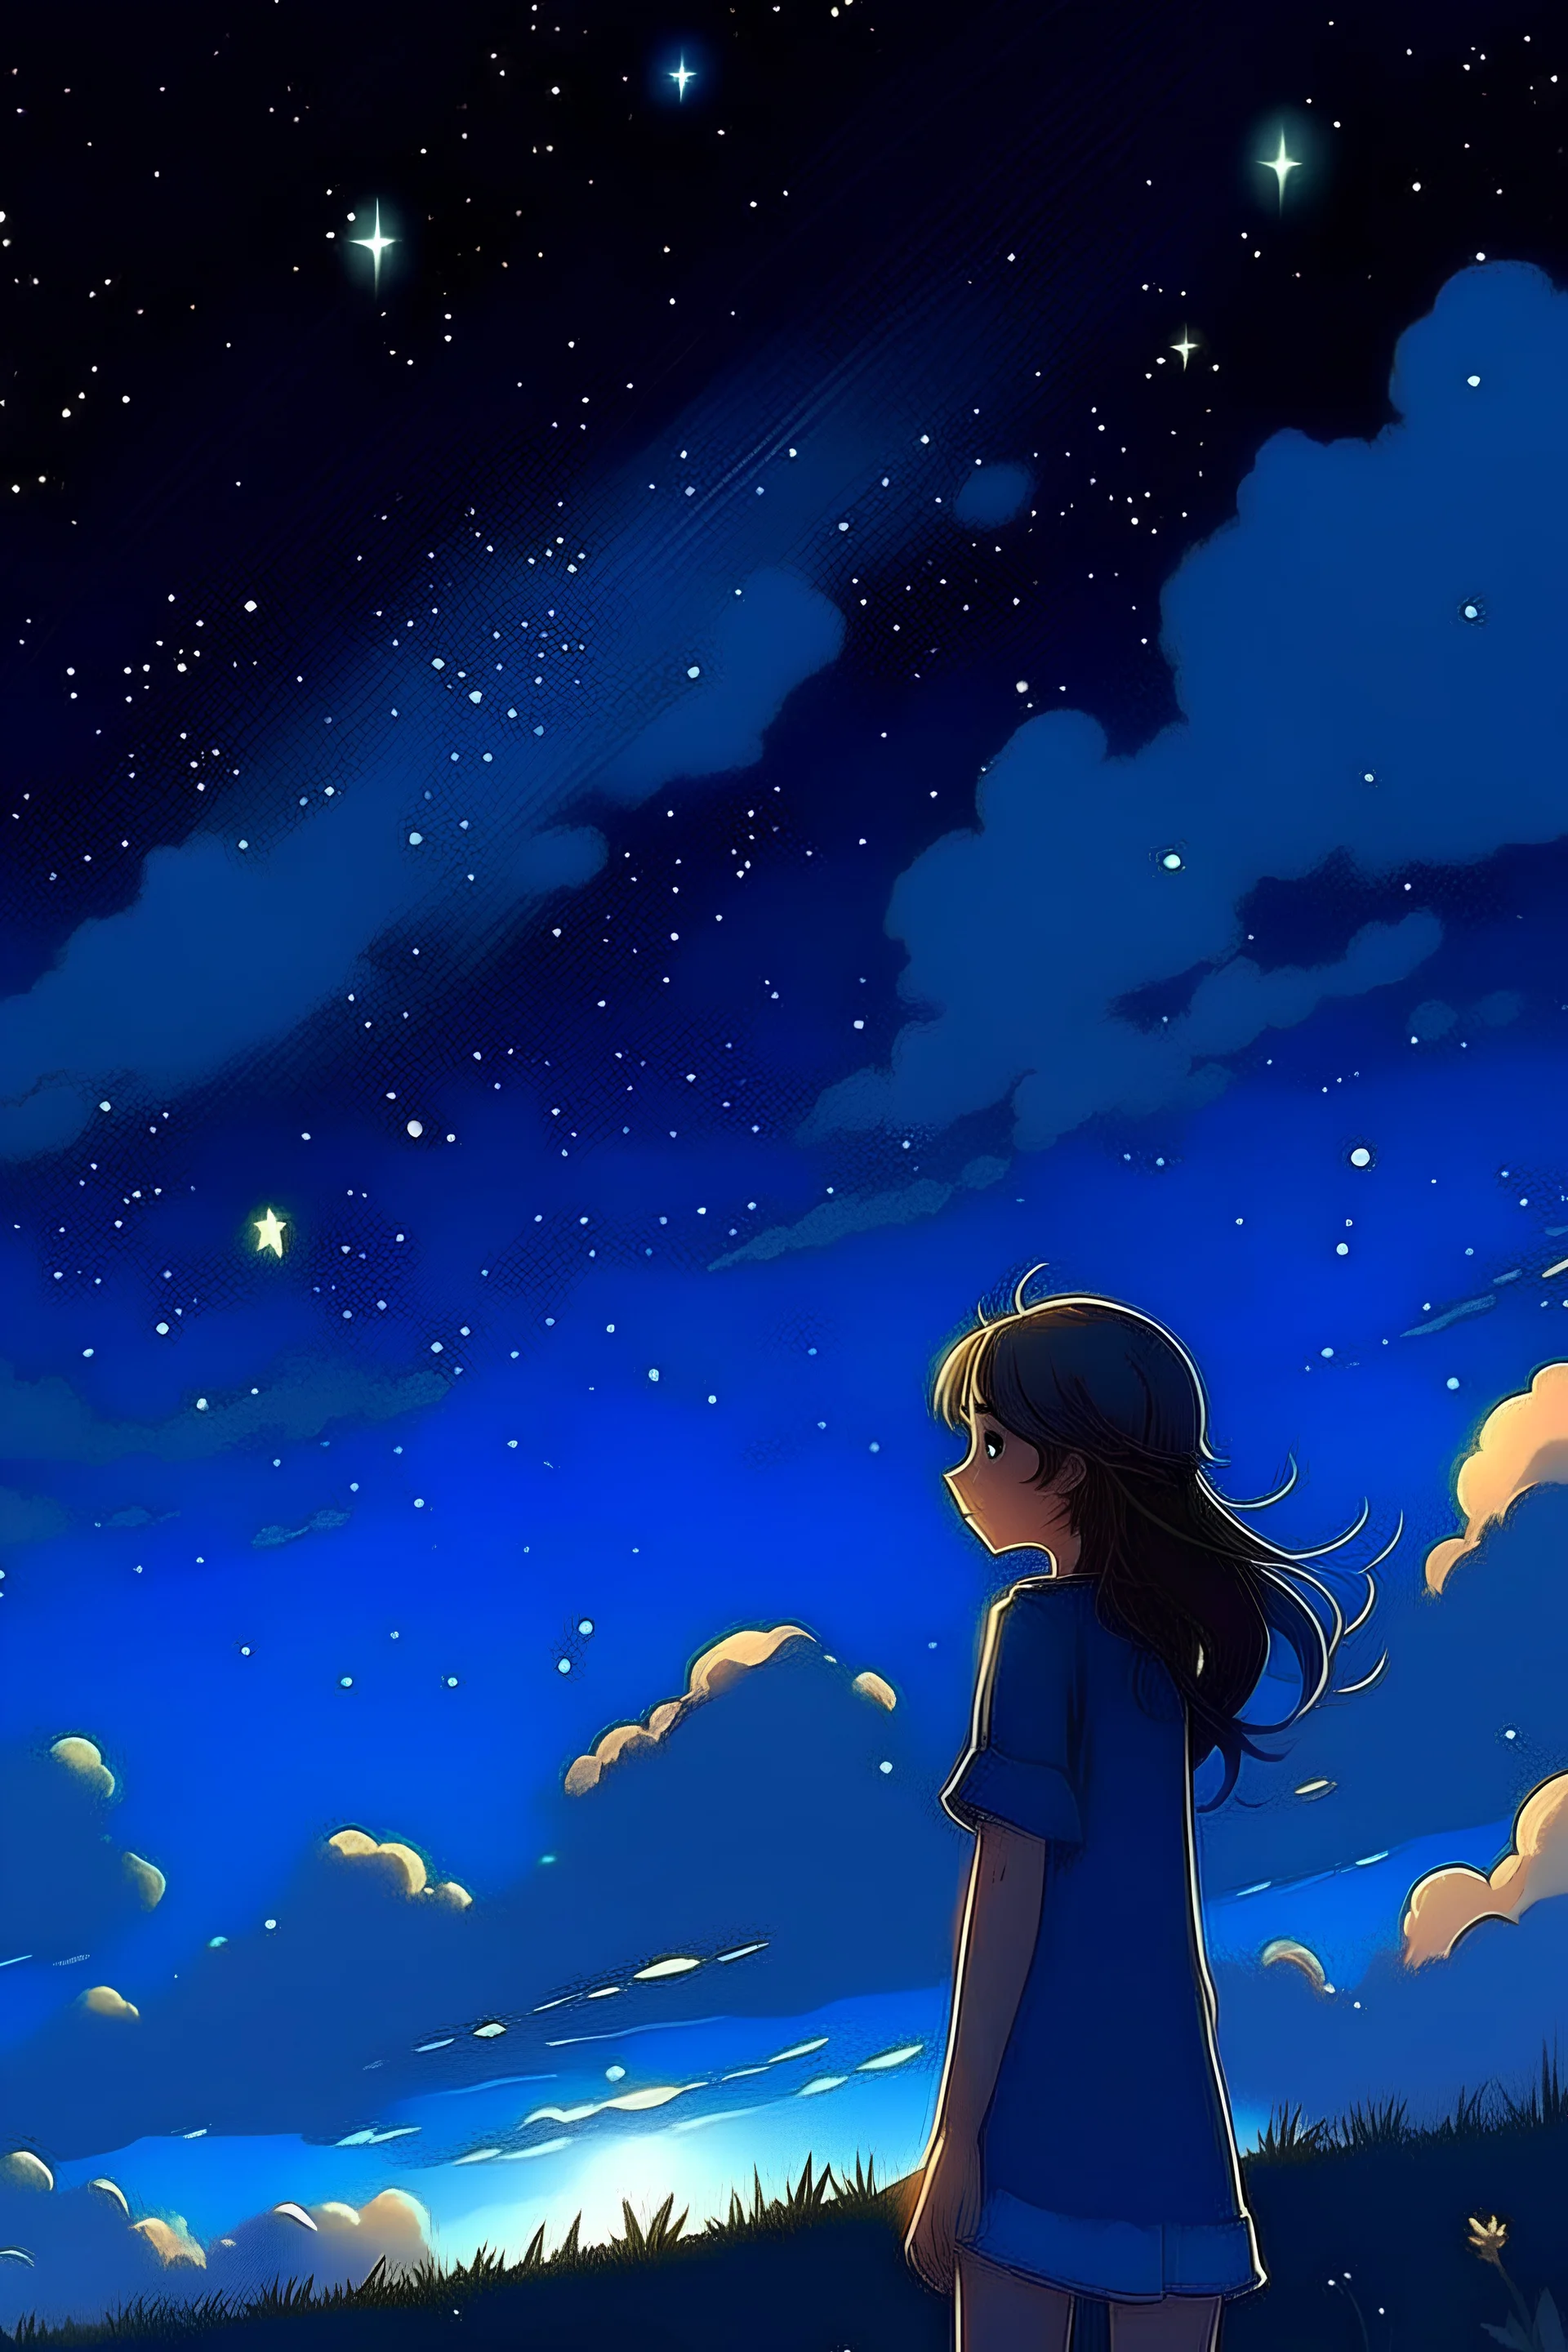 'Cause you're a sky, 'cause you're a sky full of stars I'm gonna give you my heart 'Cause you're a sky, 'cause you're a sky full of stars 'Cause you light up the path